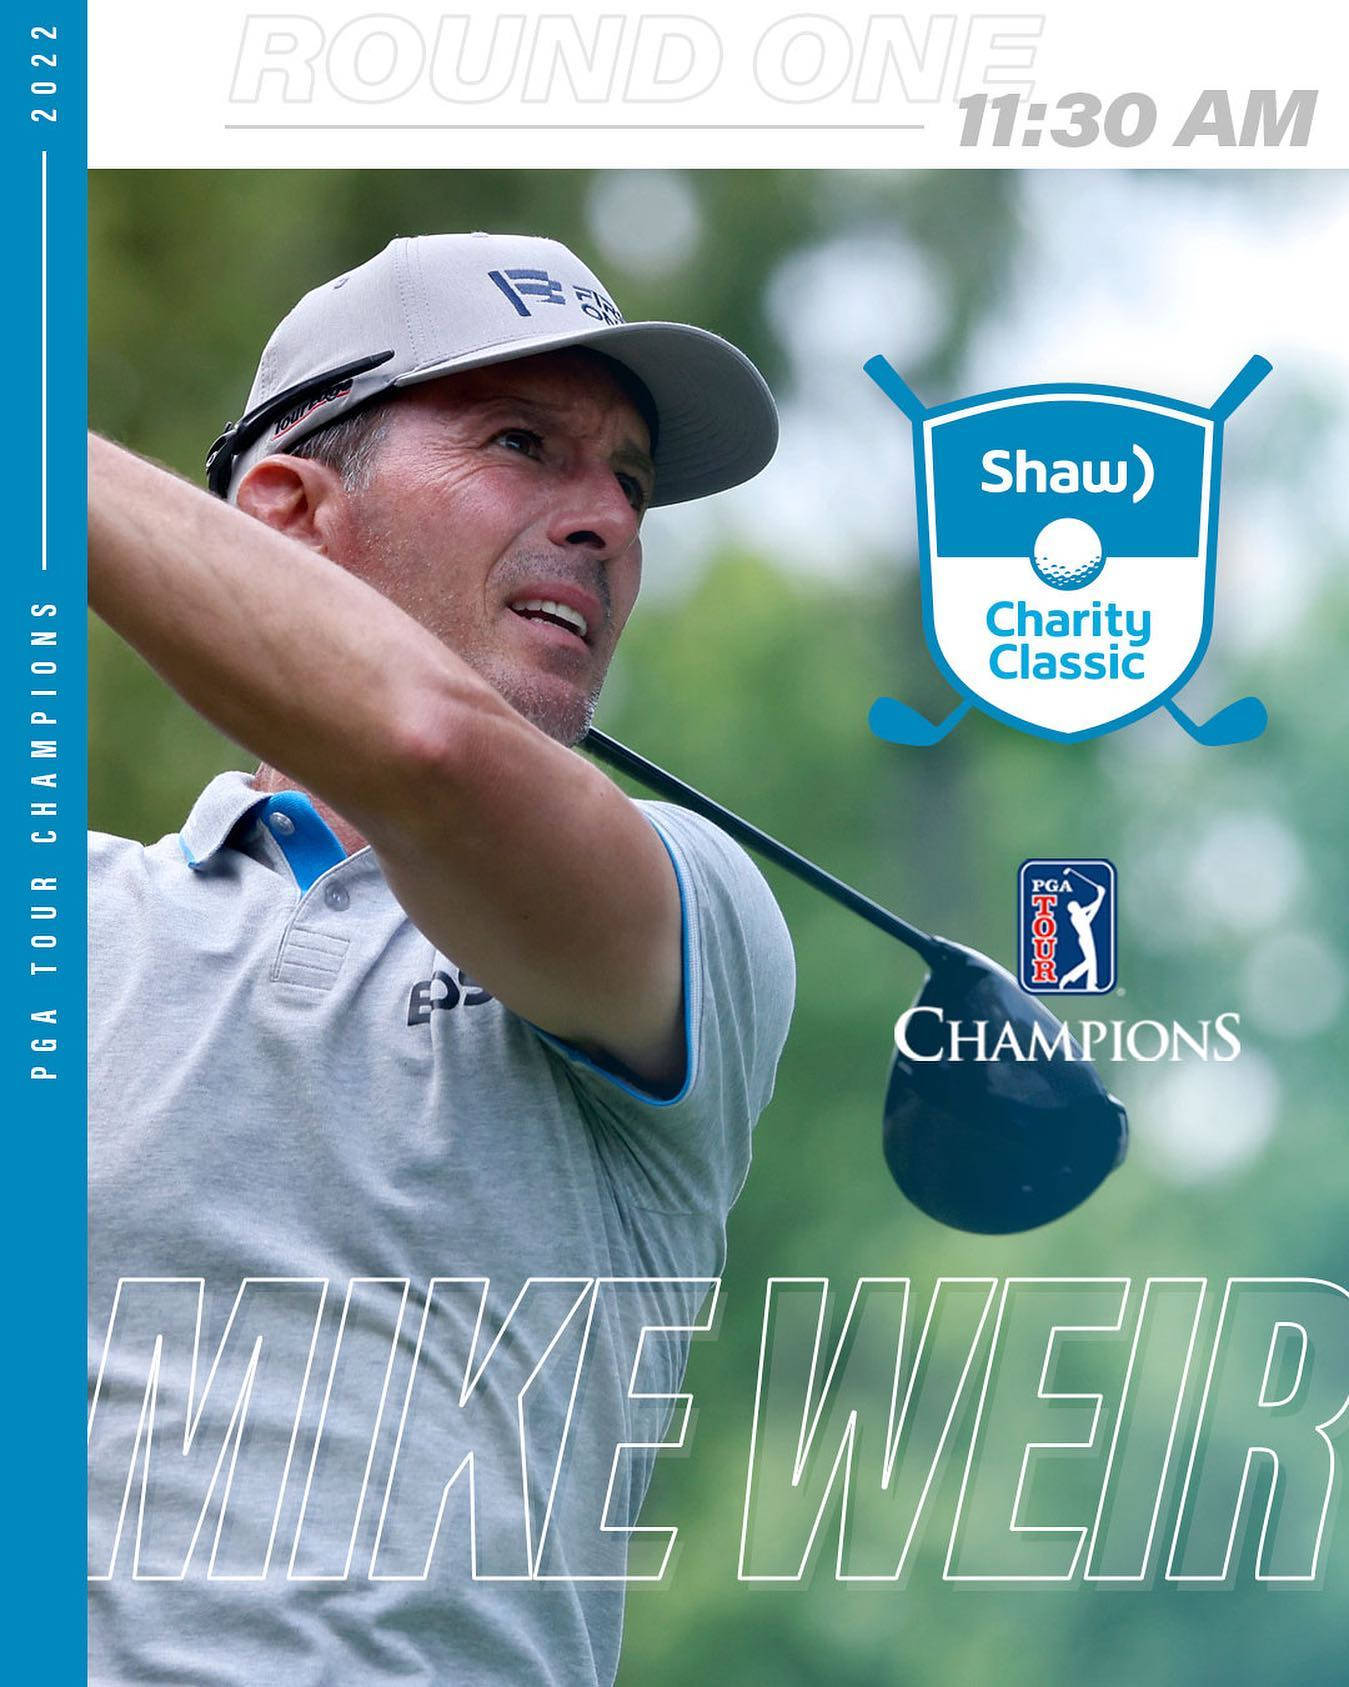 Mike Weir Game Poster Portrait Wallpaper